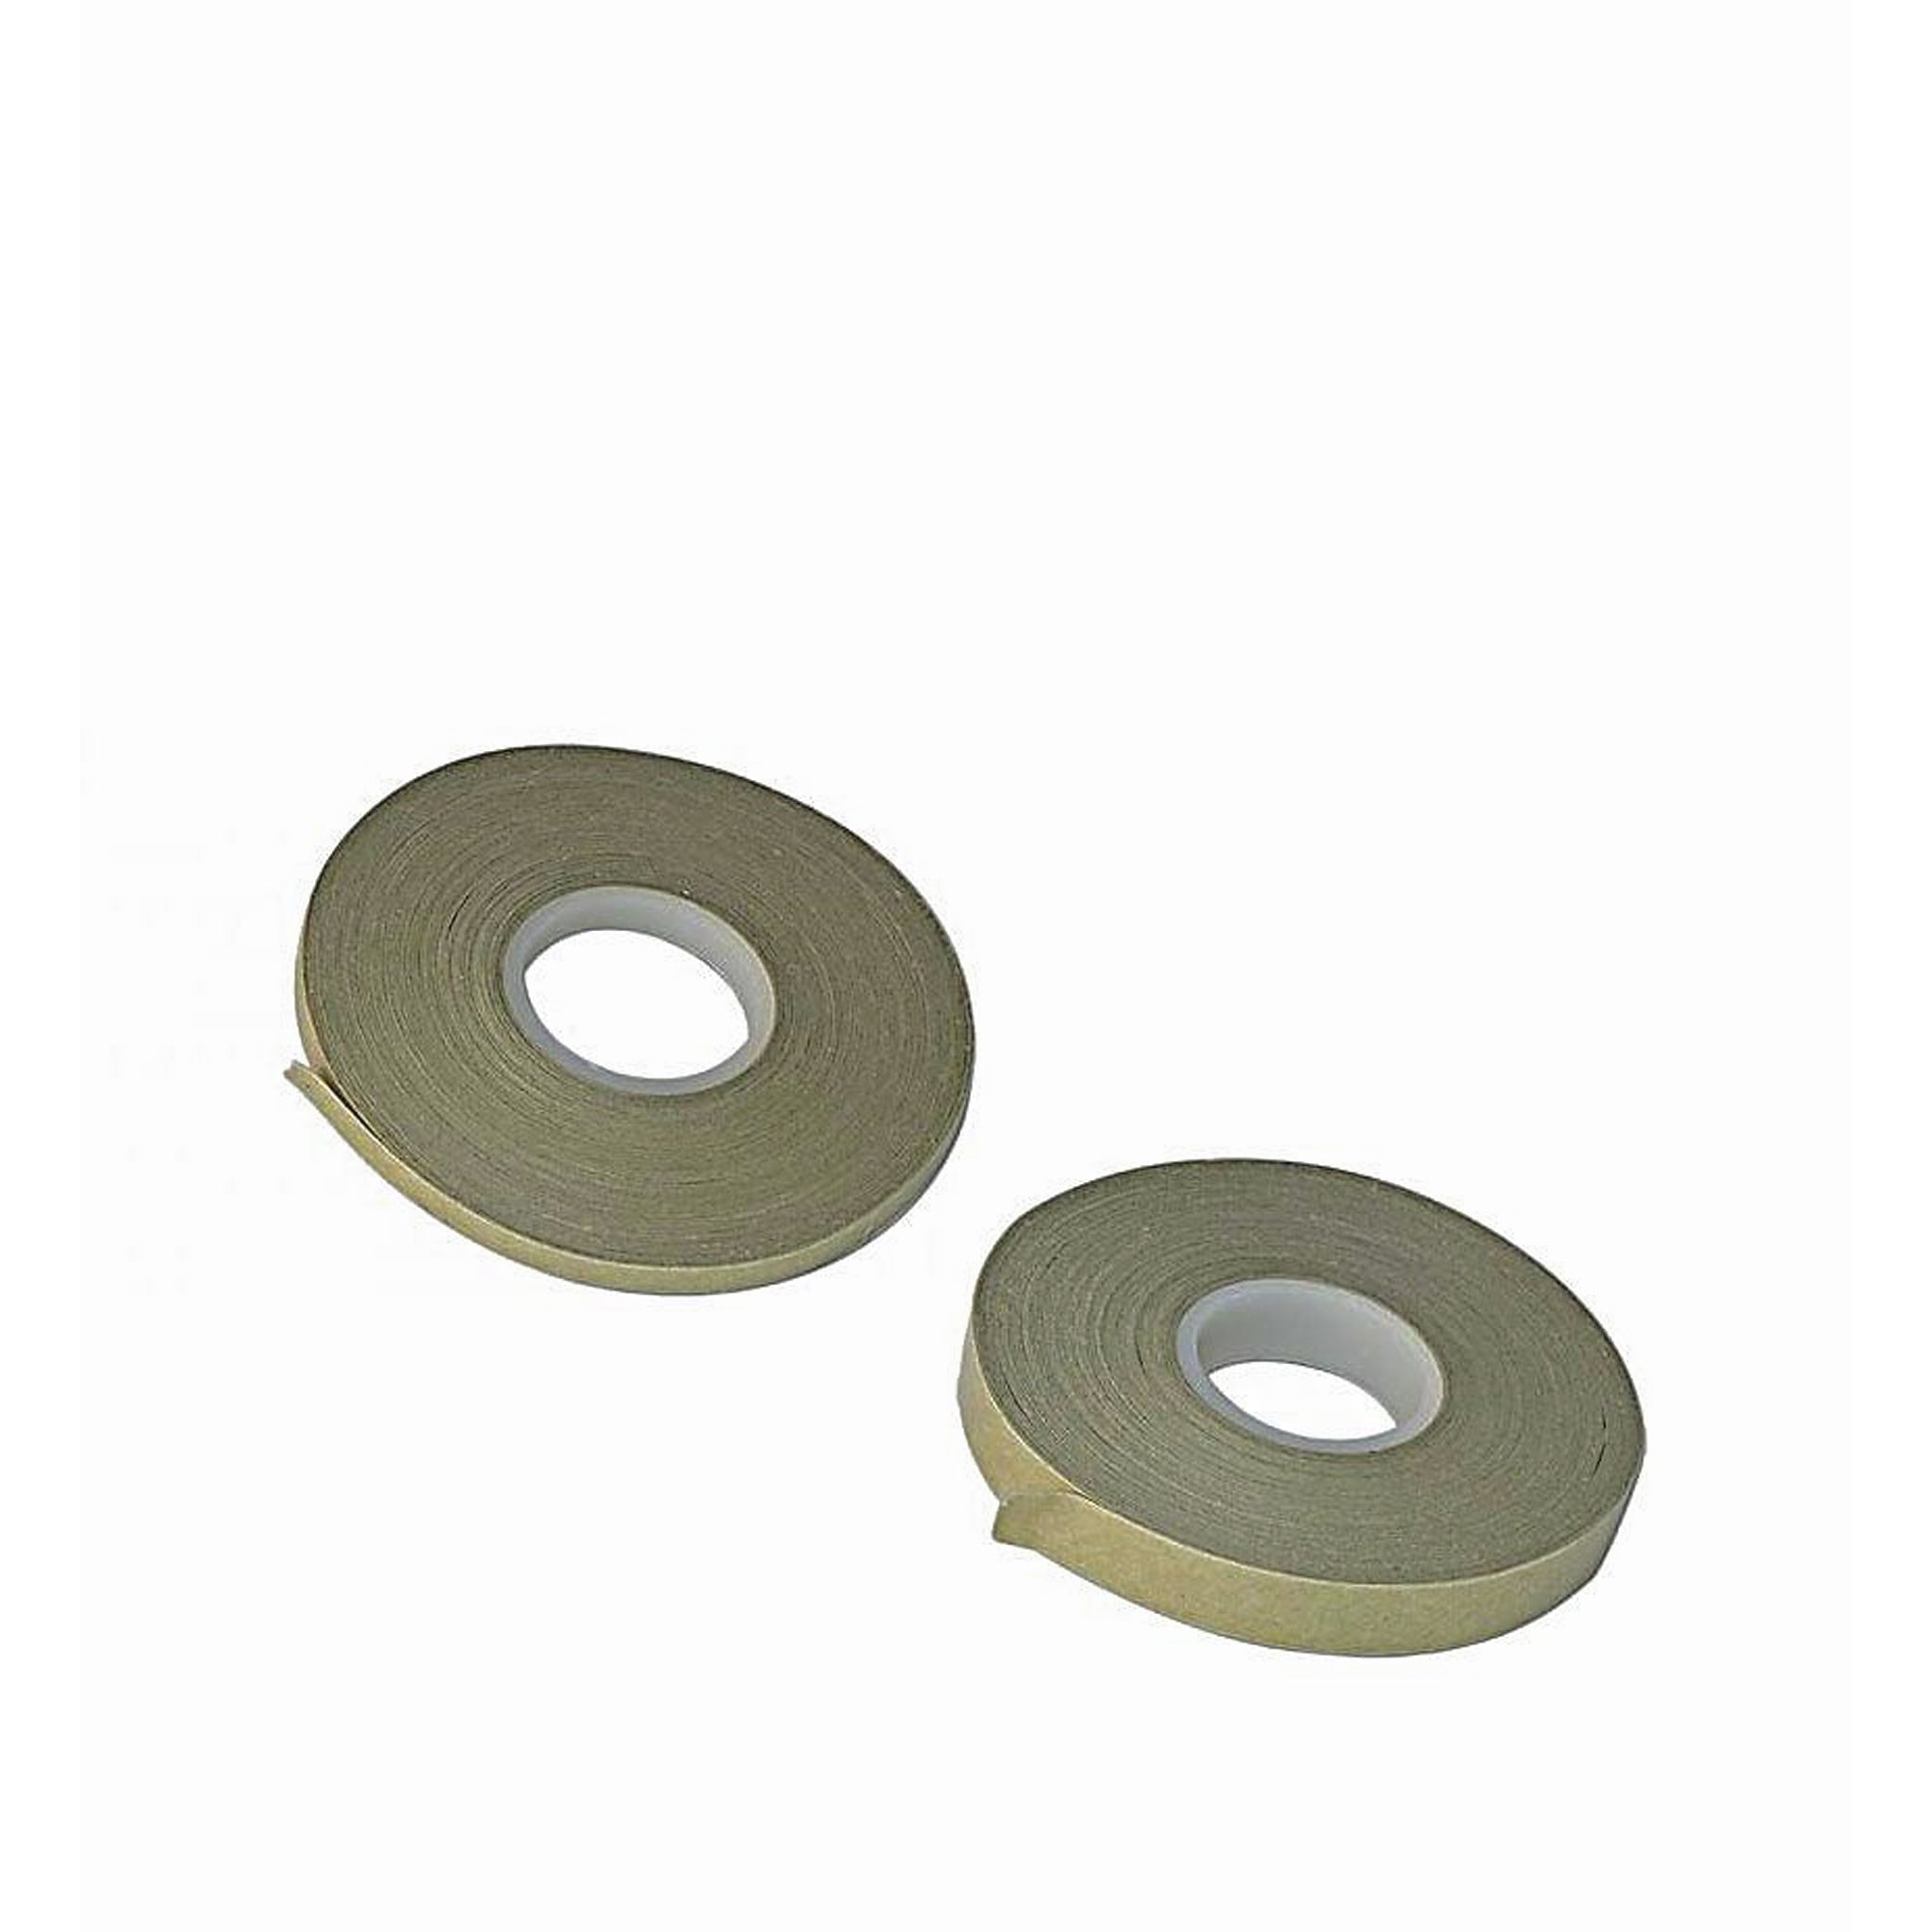 Tanner's Bond Adhesive Tape - Repositionable from Identity Leathercraft